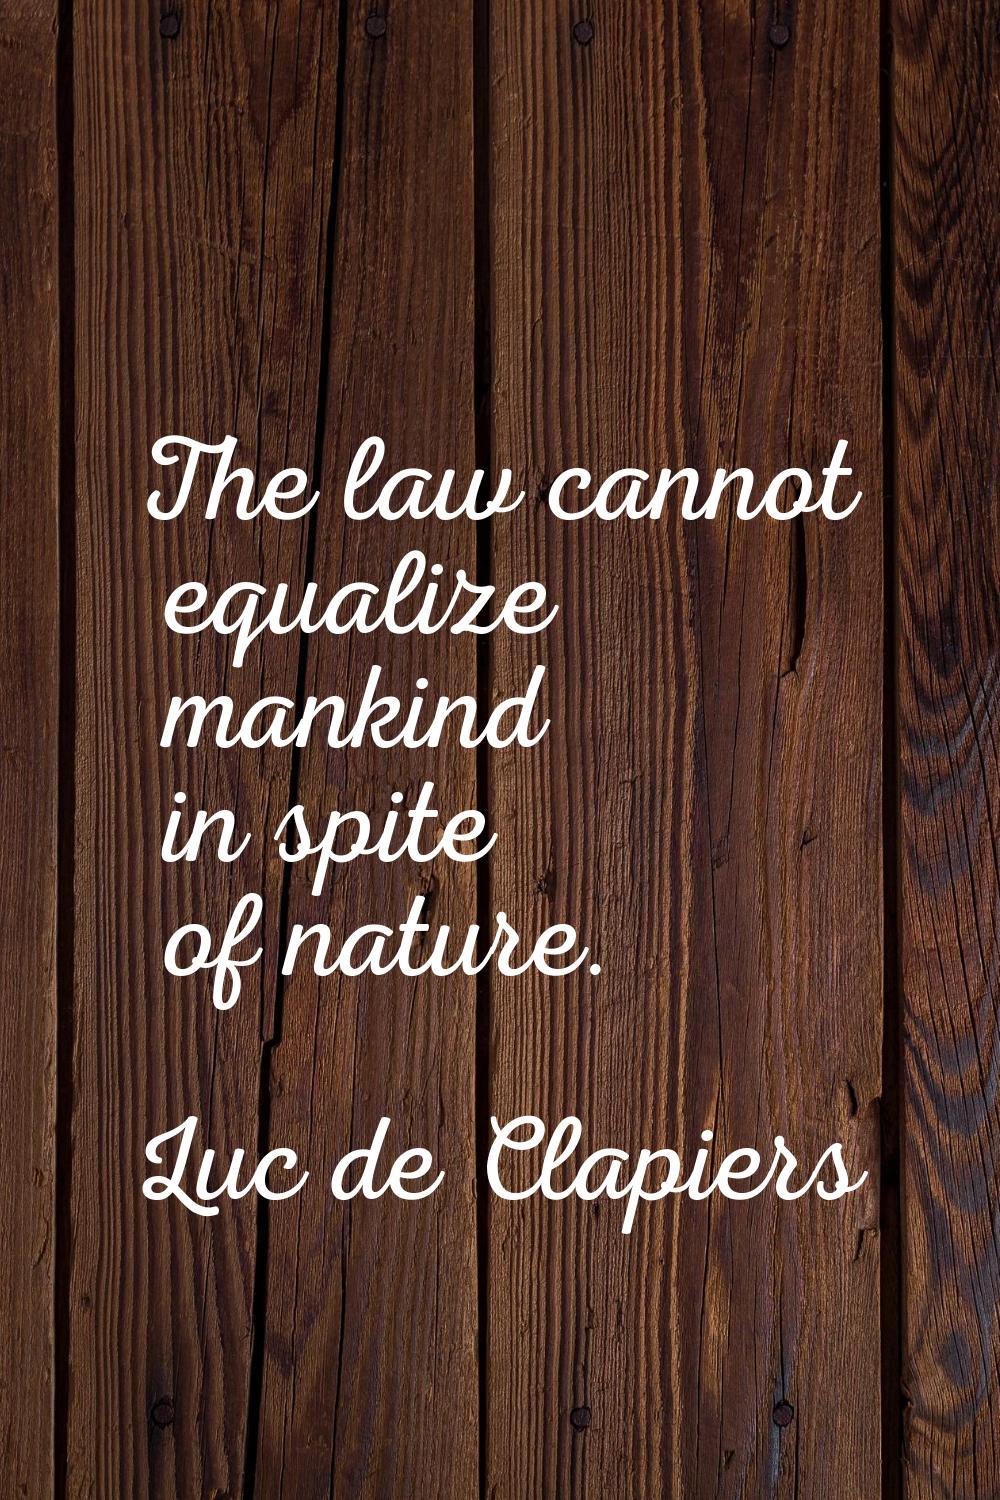 The law cannot equalize mankind in spite of nature.